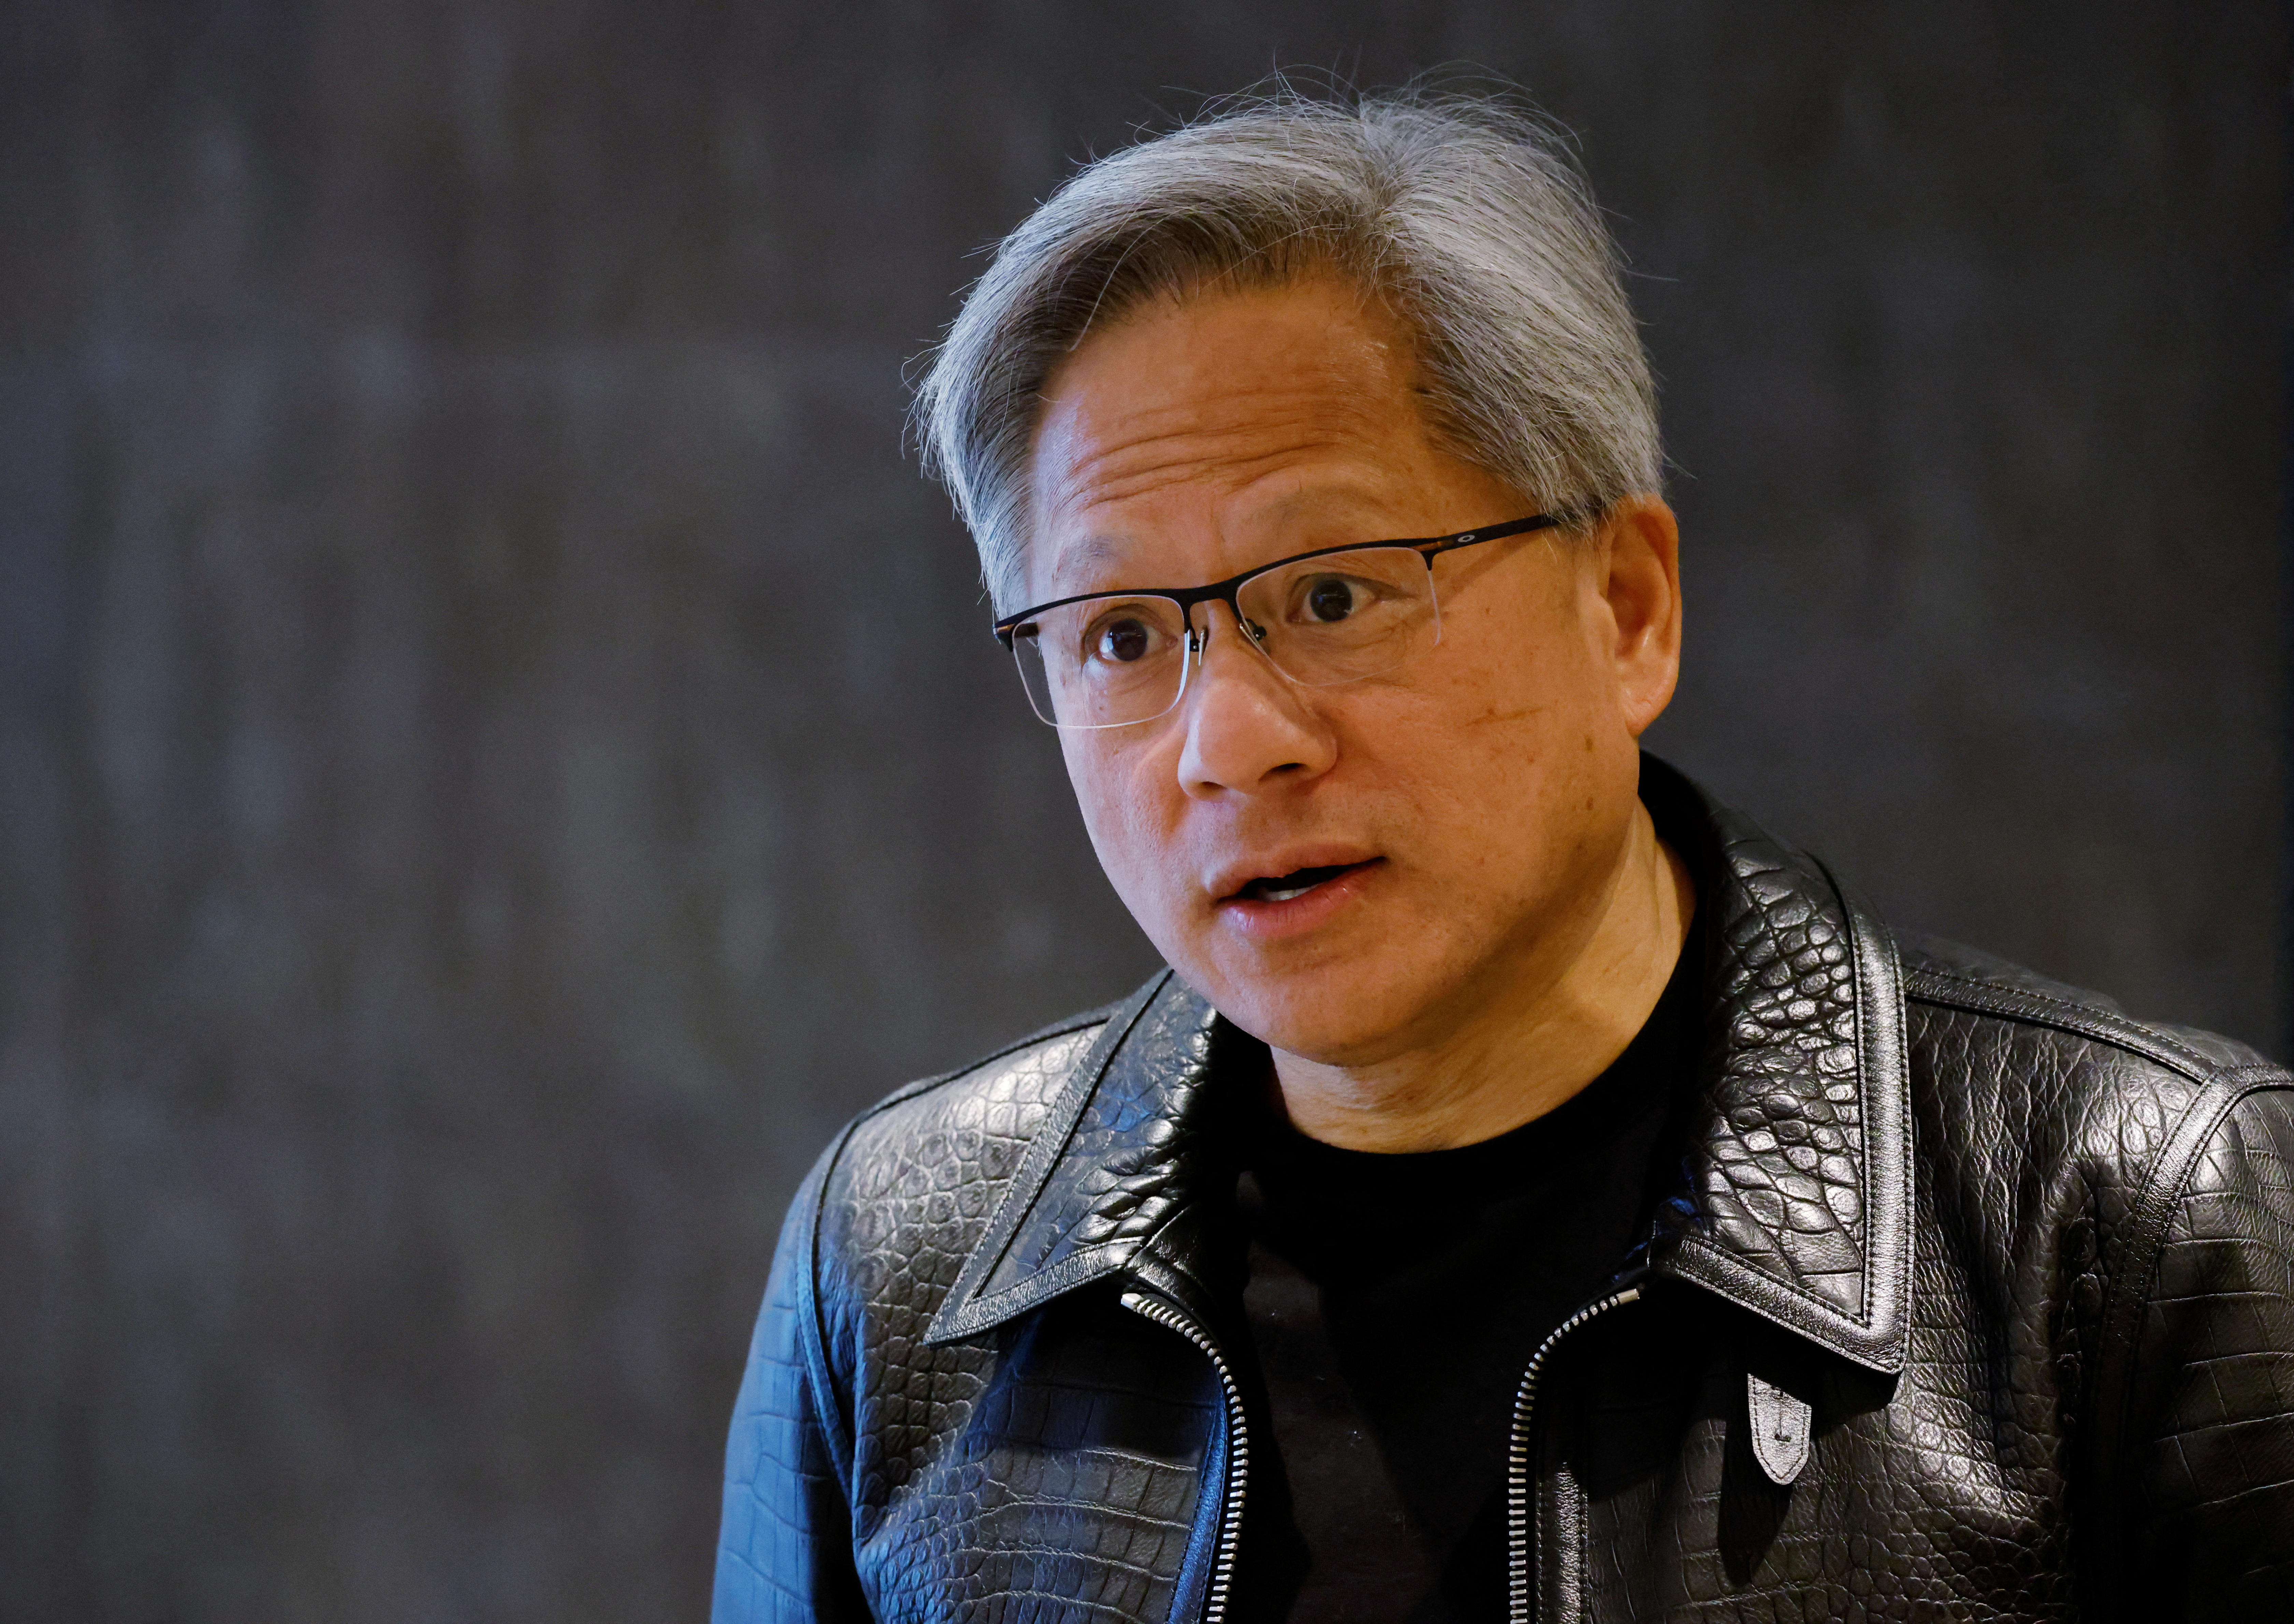 NVIDIA’s CEO Jensen Huang attends a media roundtable meeting in Singapore